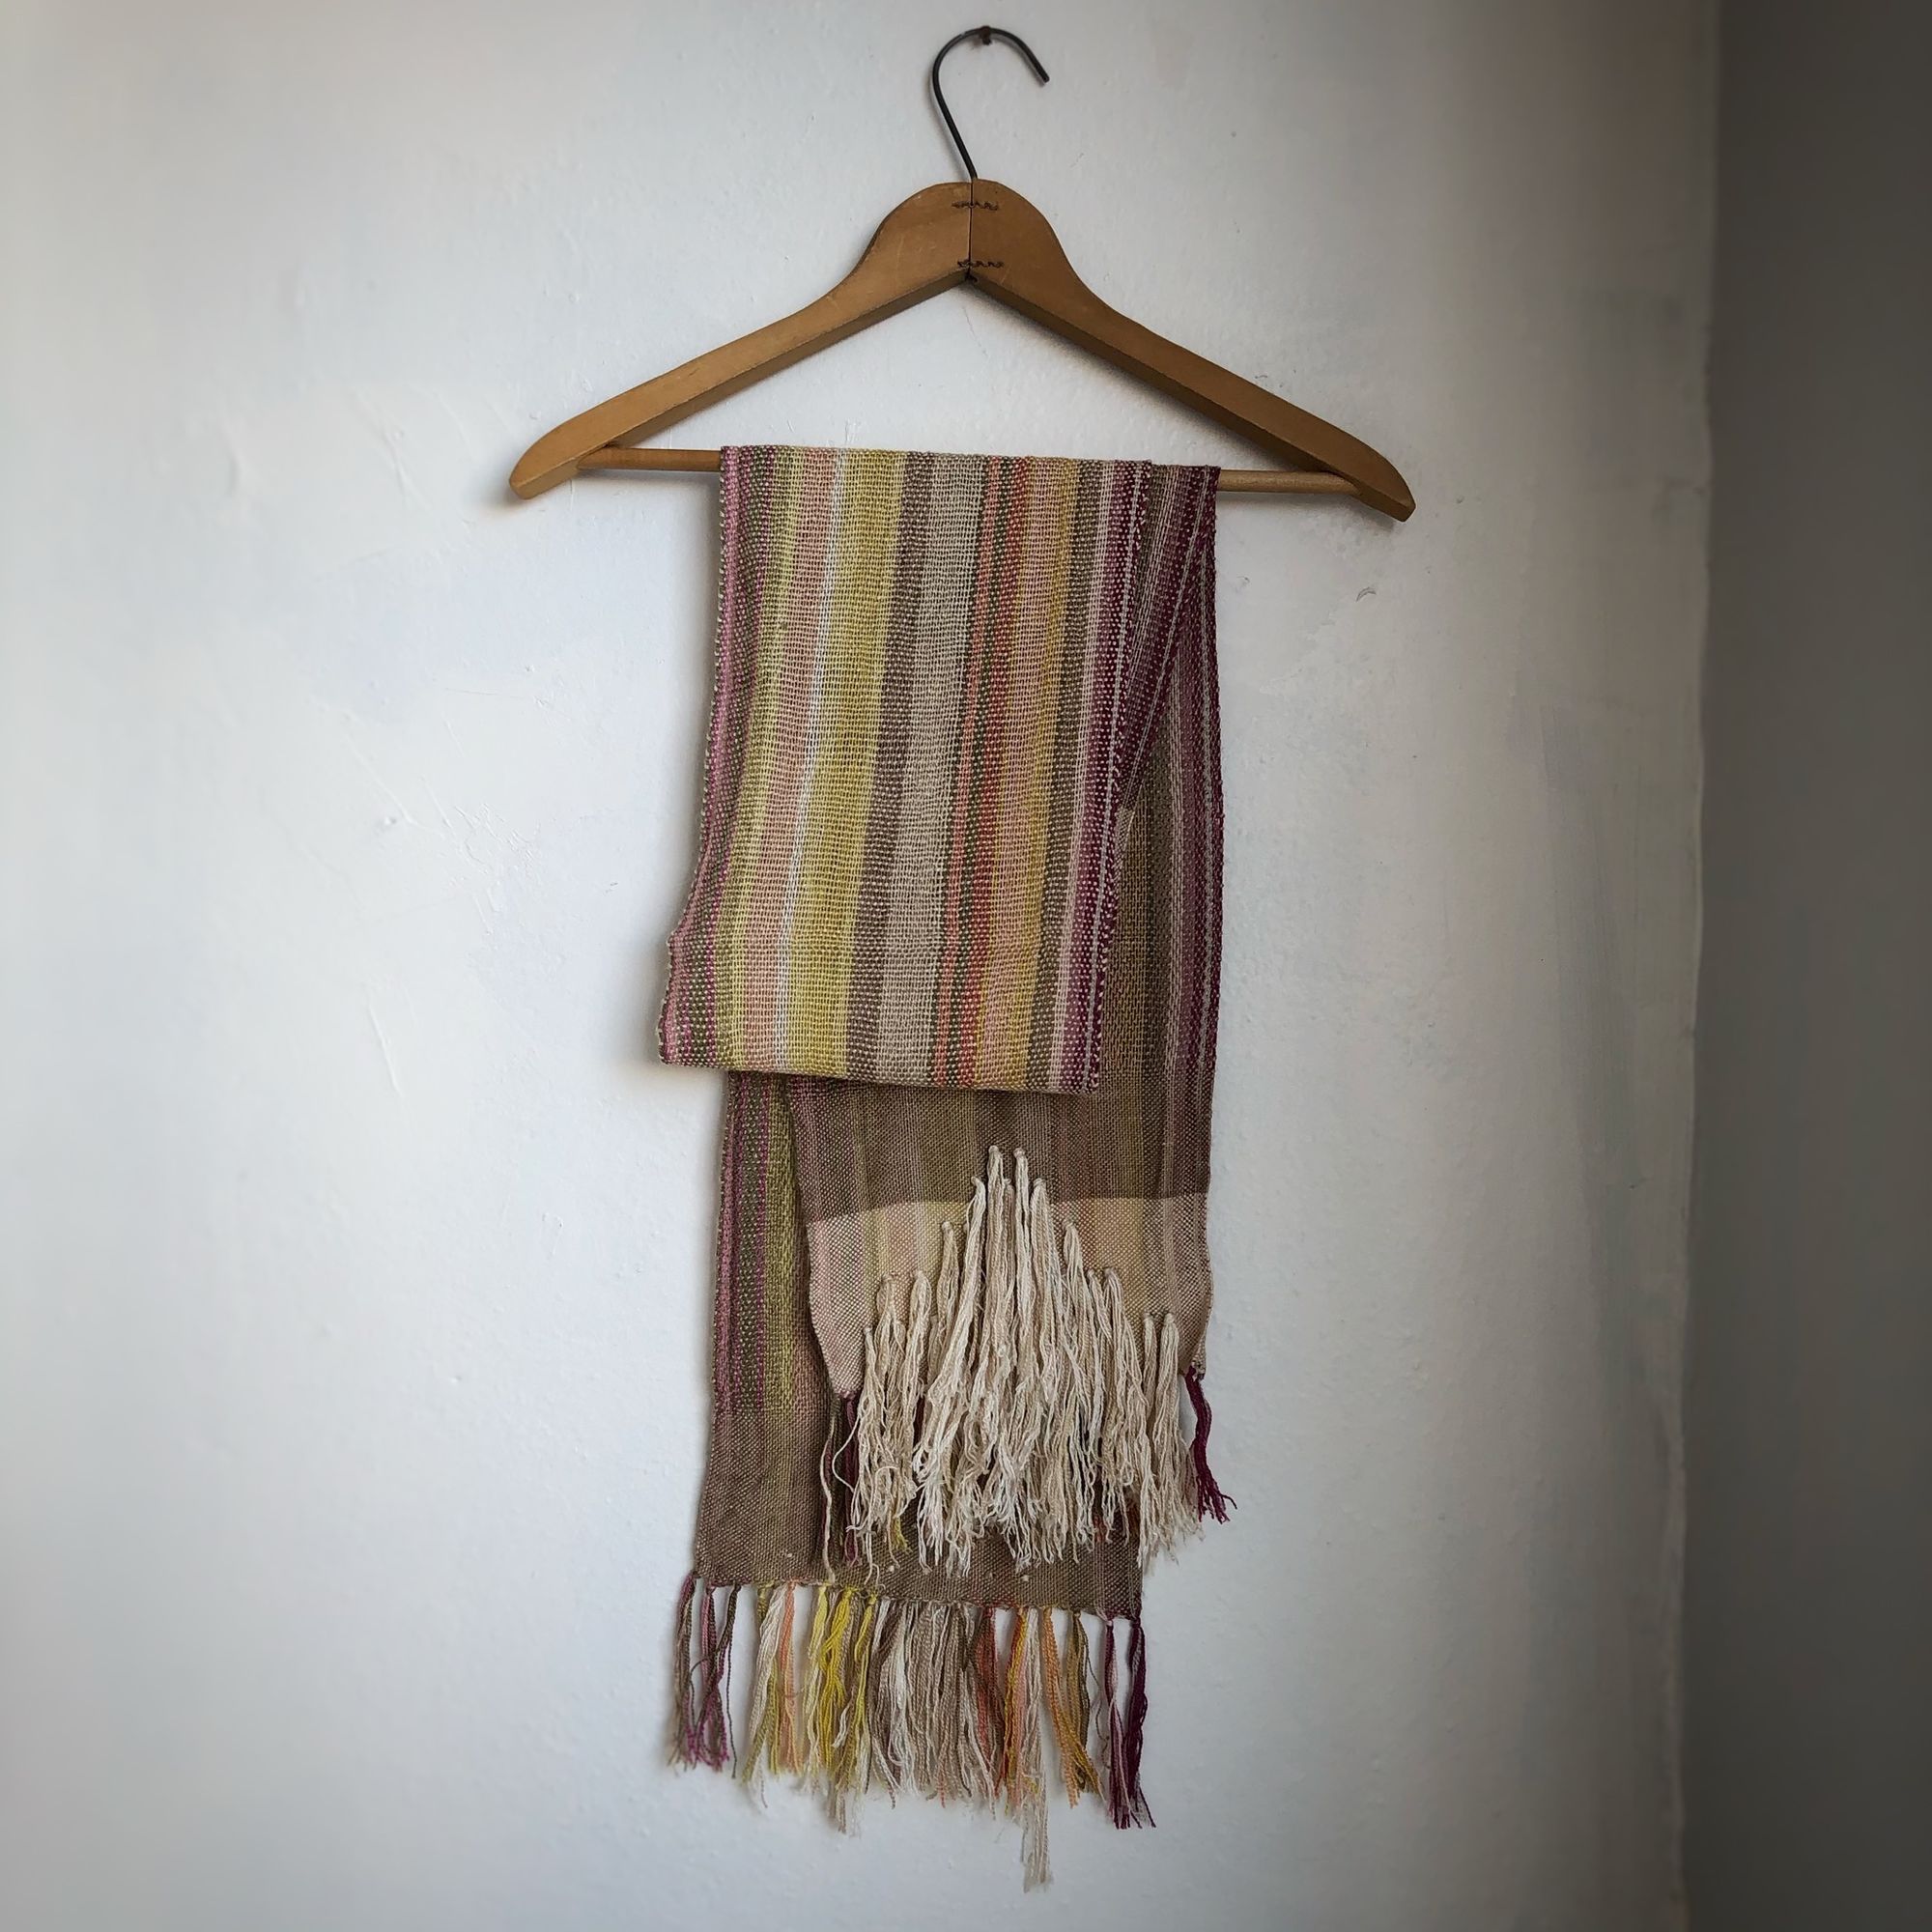 Naturally dyed earth-tone scarf hanging on a hanger on a white wall